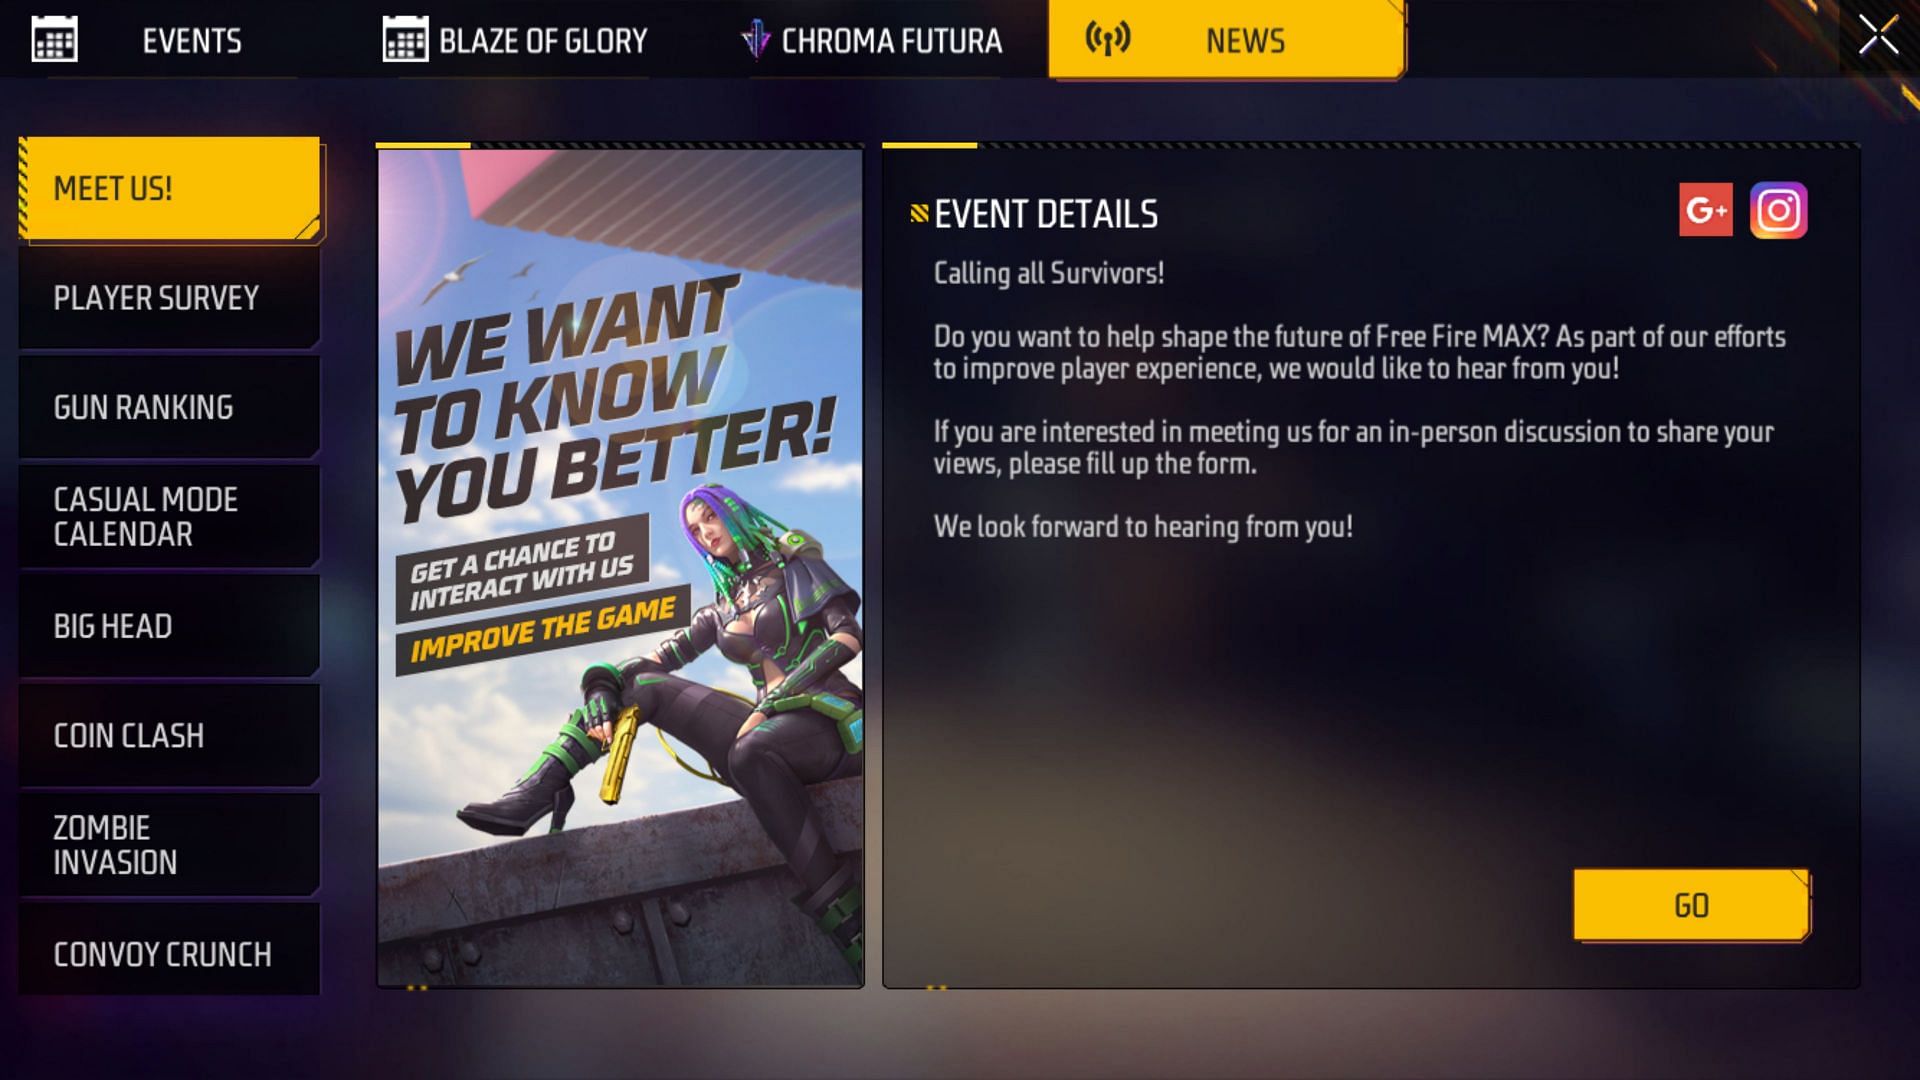 The in-game form calling all survivors to an in-person discussion to share their views (Image via Garena)